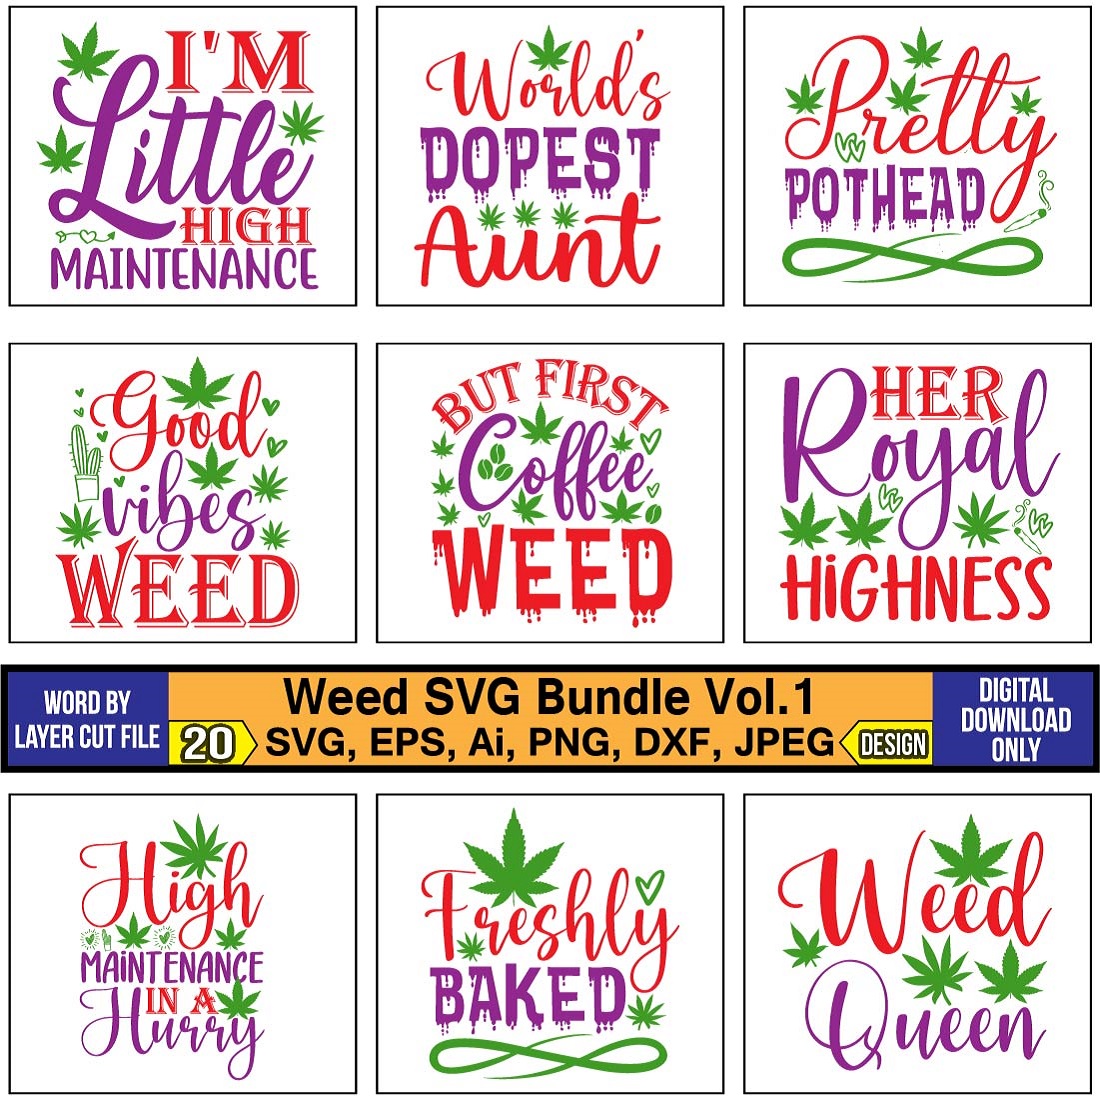 Collection of unique images for prints on the weed theme.